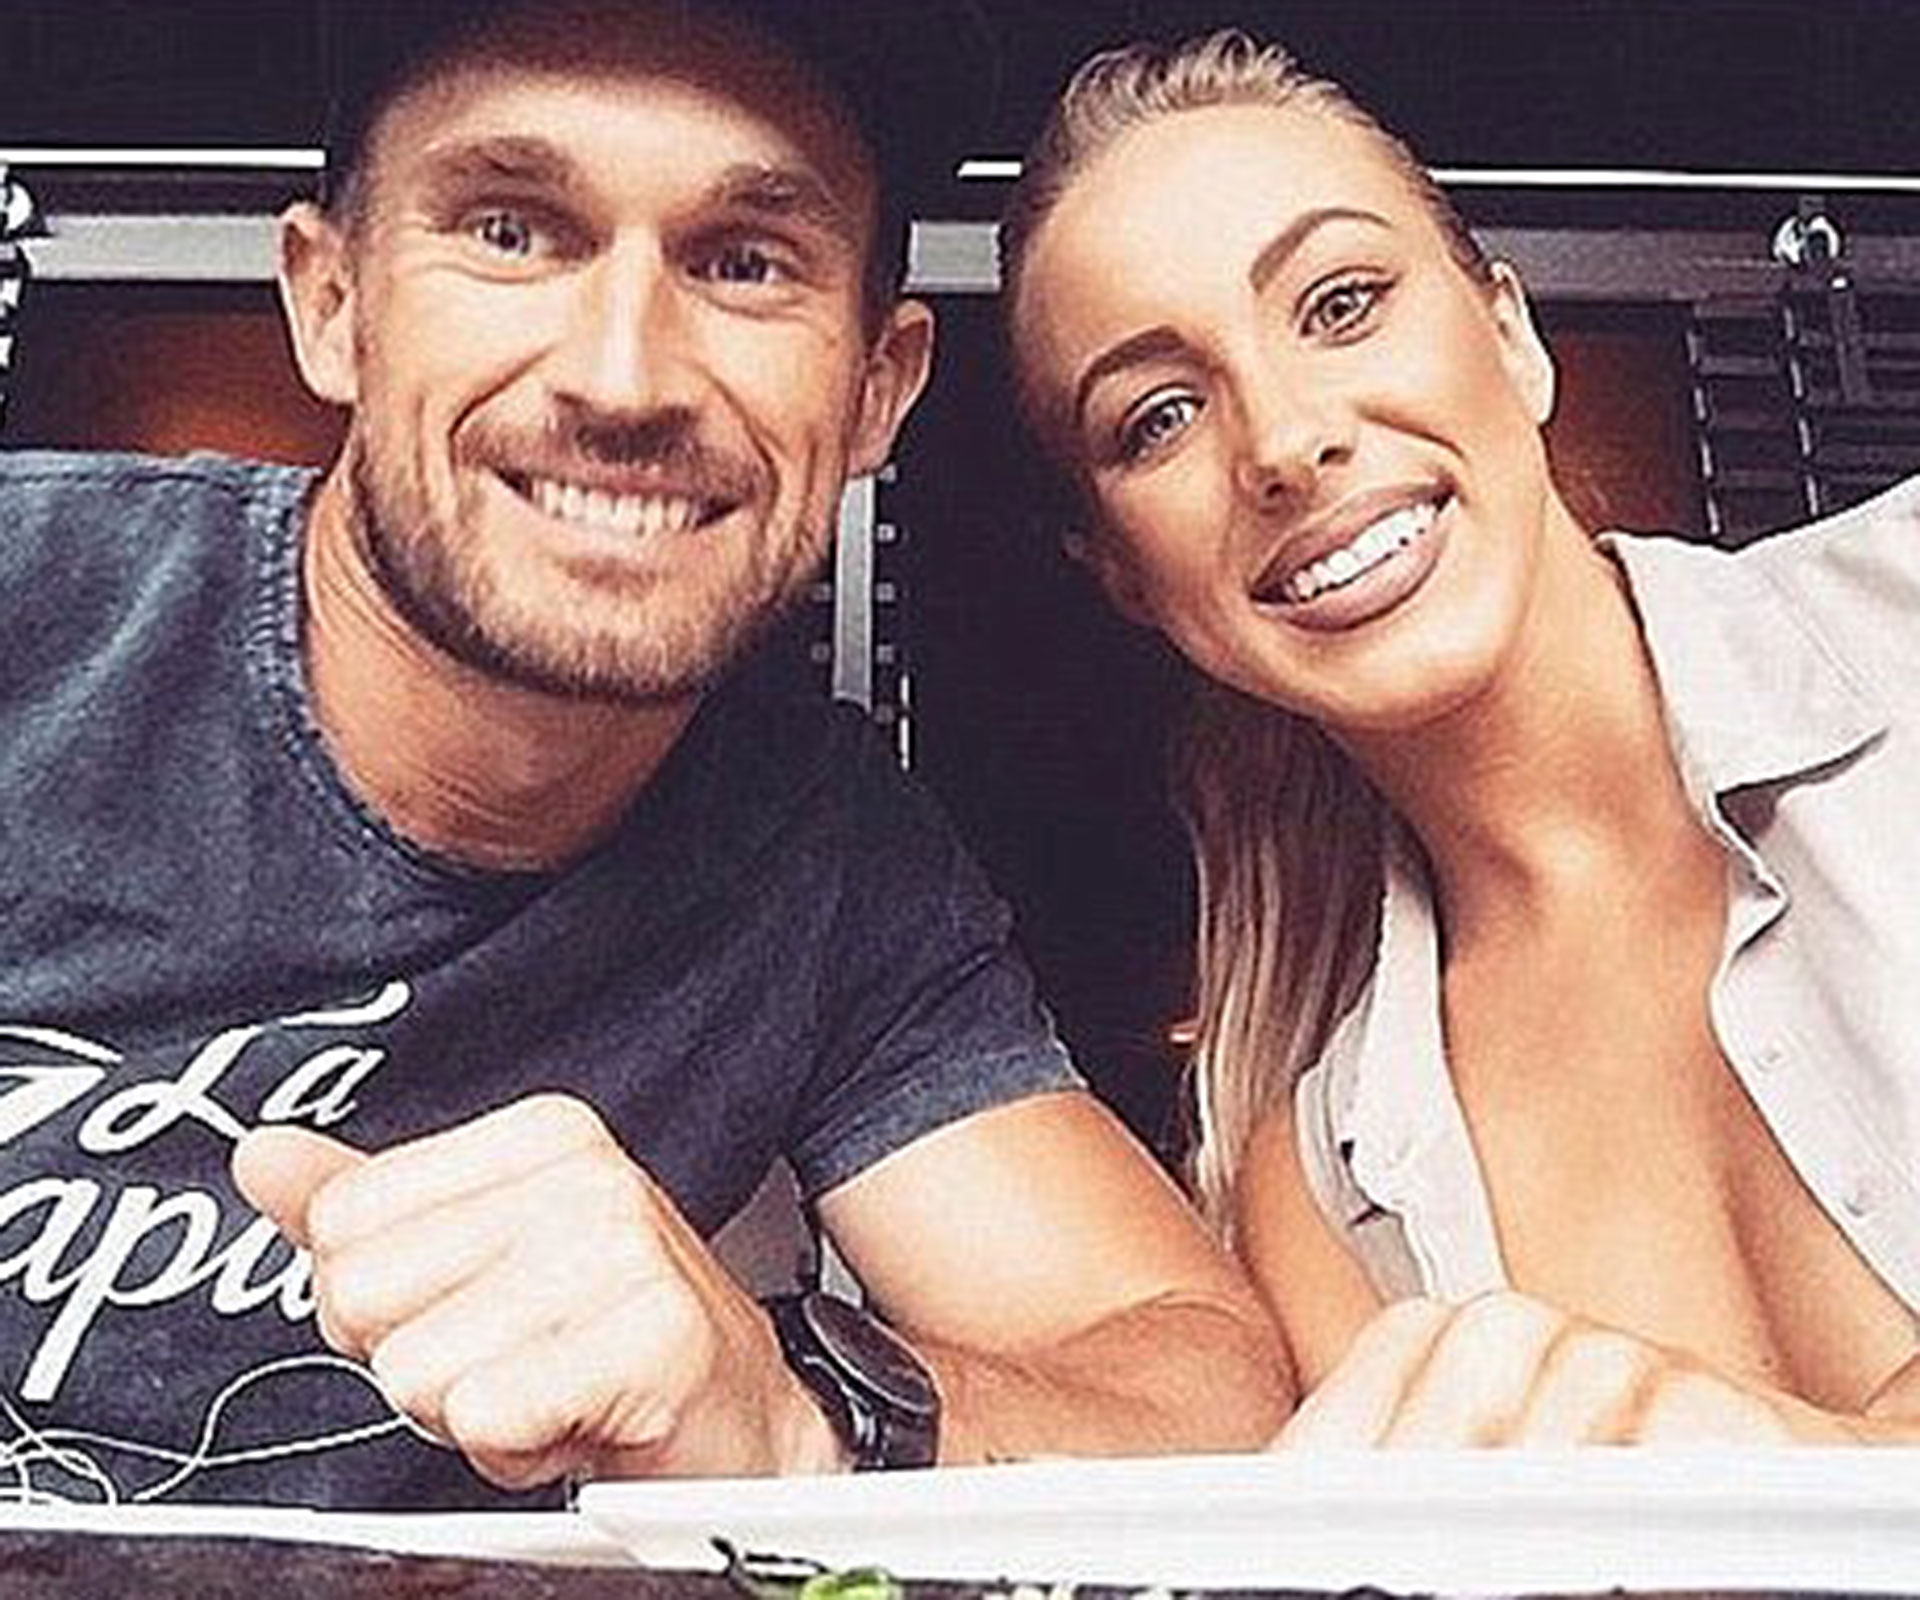 Jono moves on with old flame